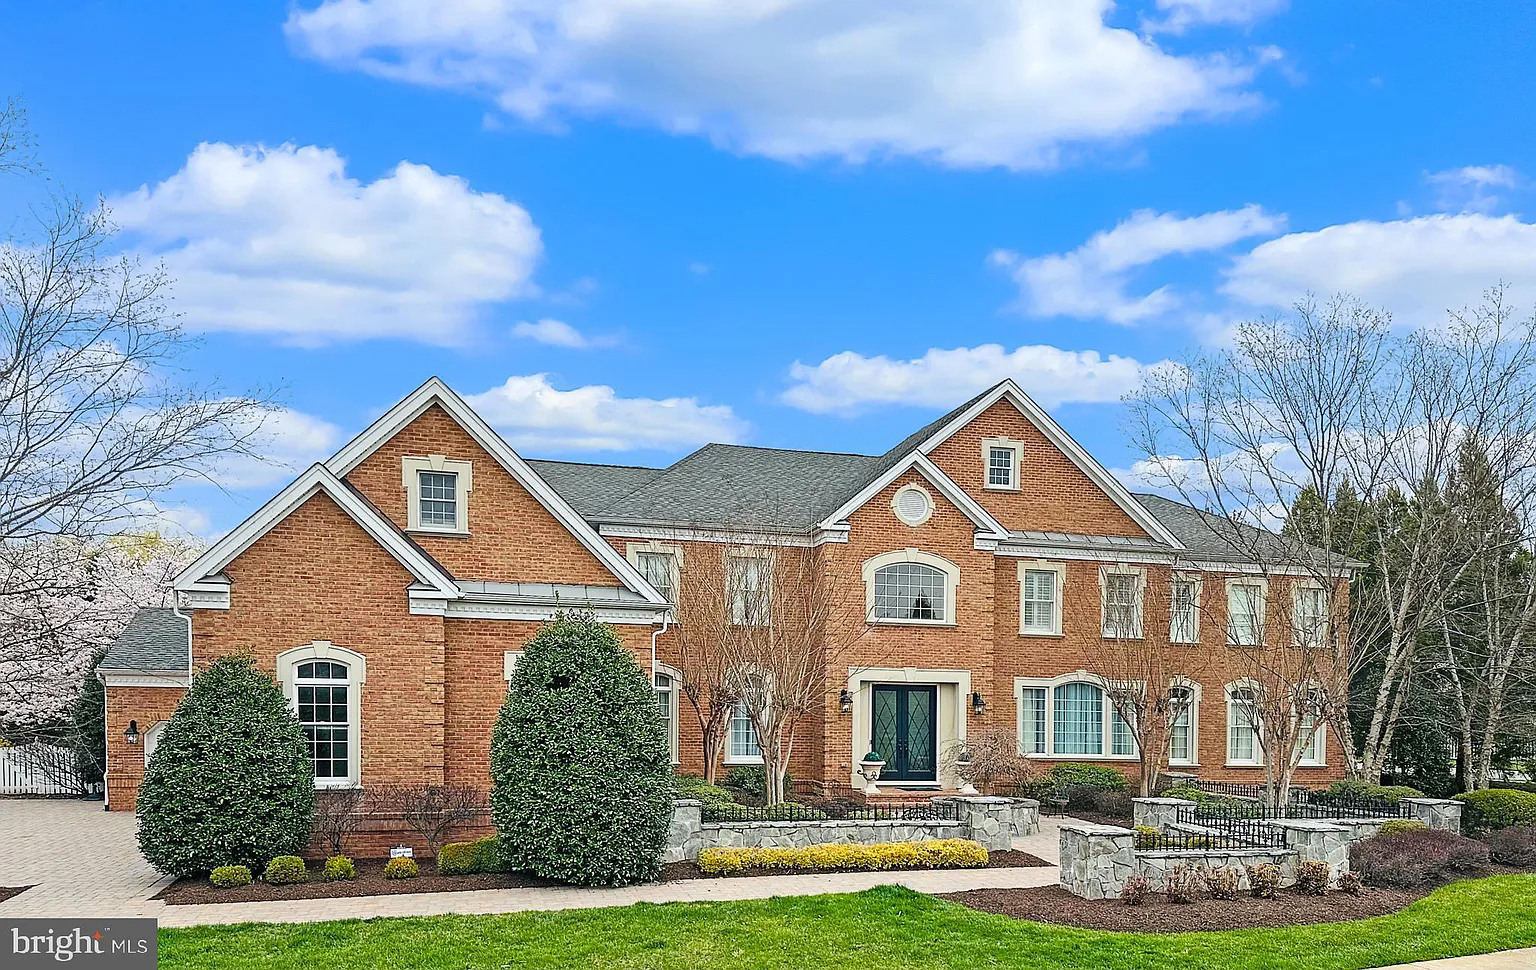 Professional exterior photo shot by SOMEONE ELSE in 2022 showing dull, flat, artificial colors of the front of a stately brick home